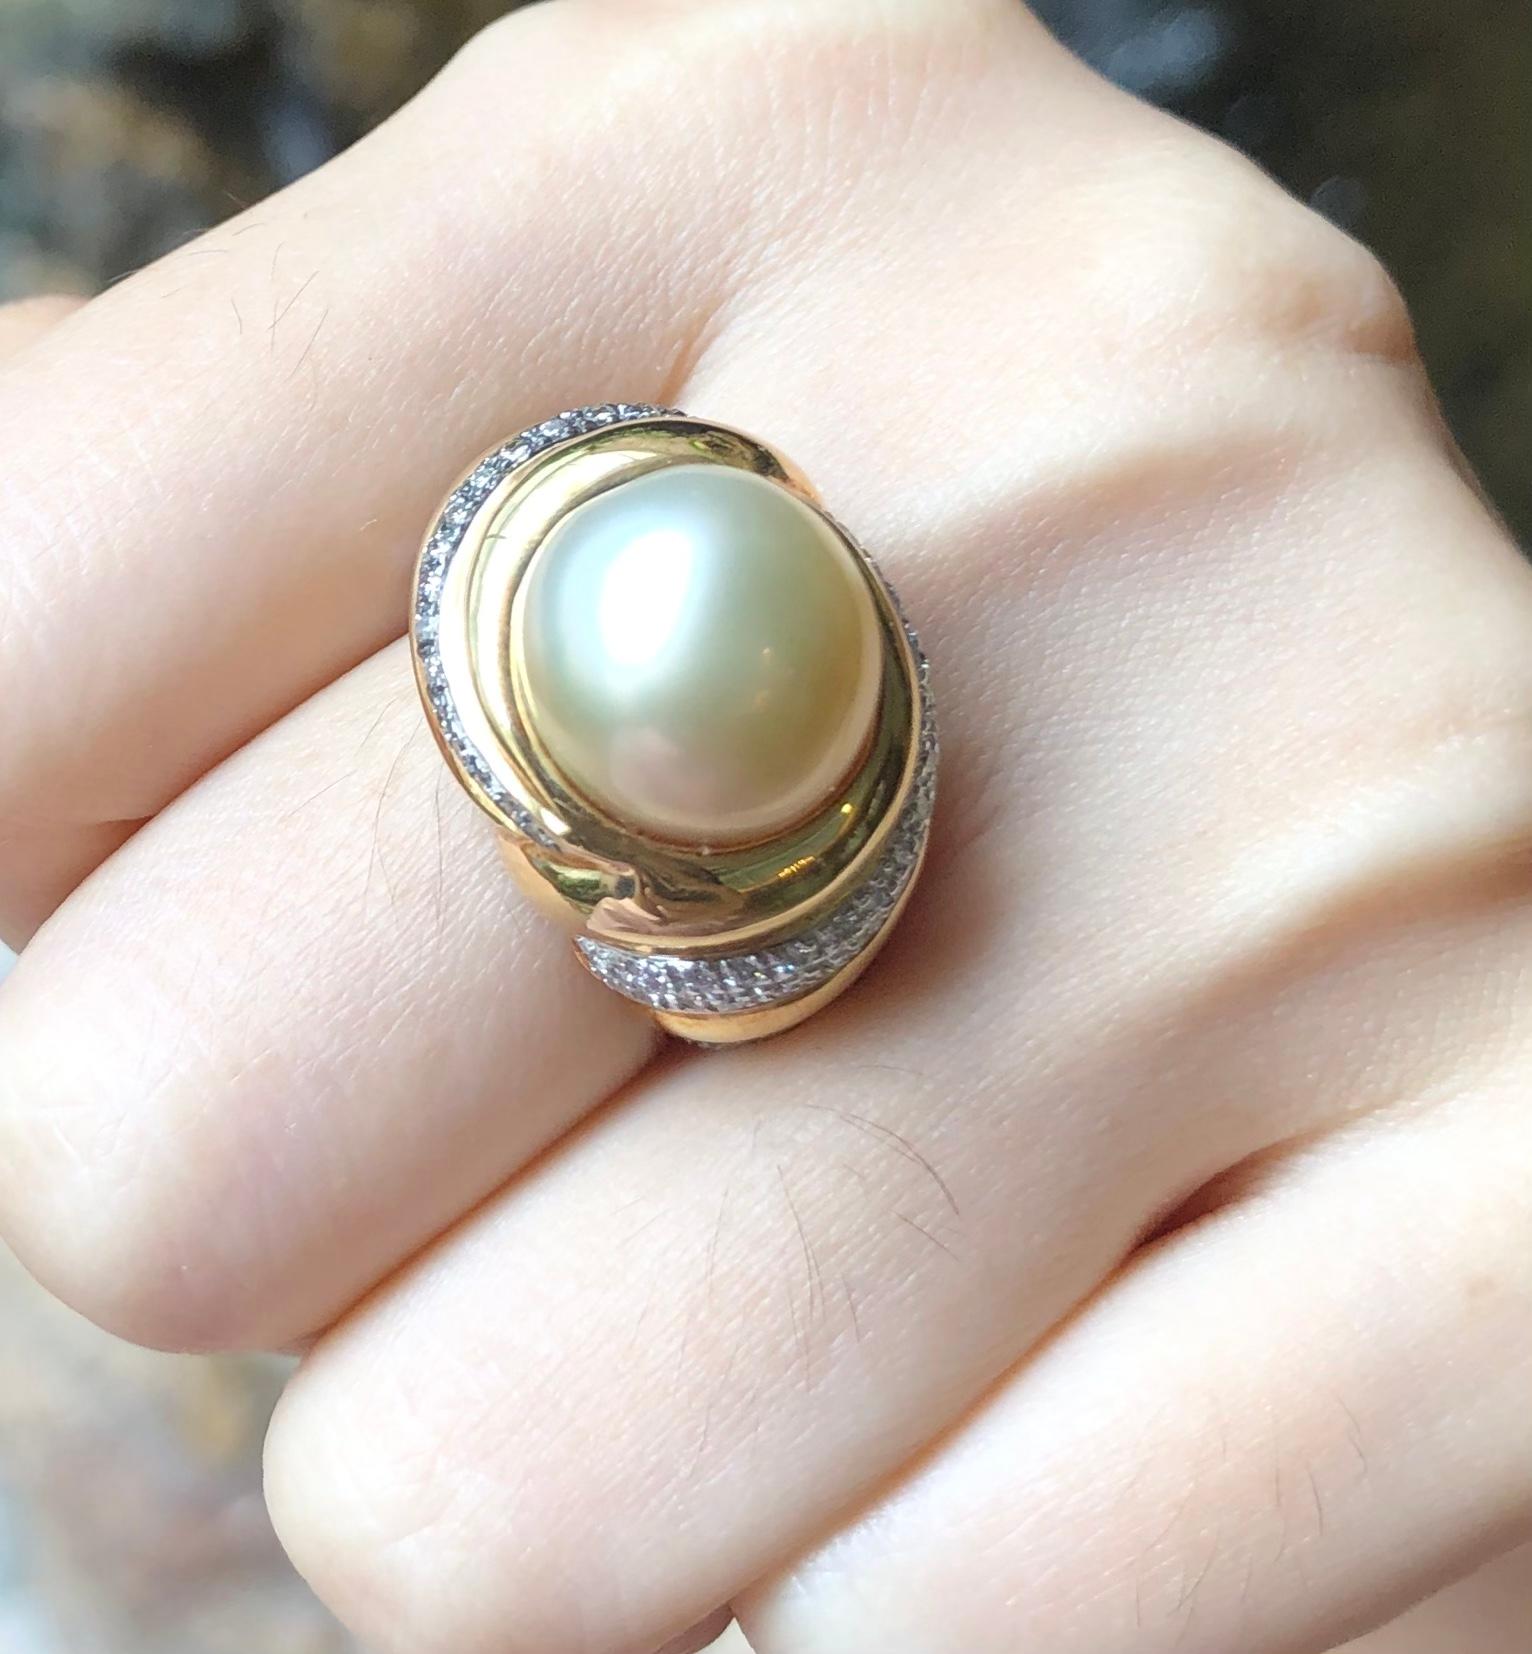 Brilliant Cut Golden South Sea Pearl with Brown Diamond Ring Set in 18 Karat Gold Settings For Sale